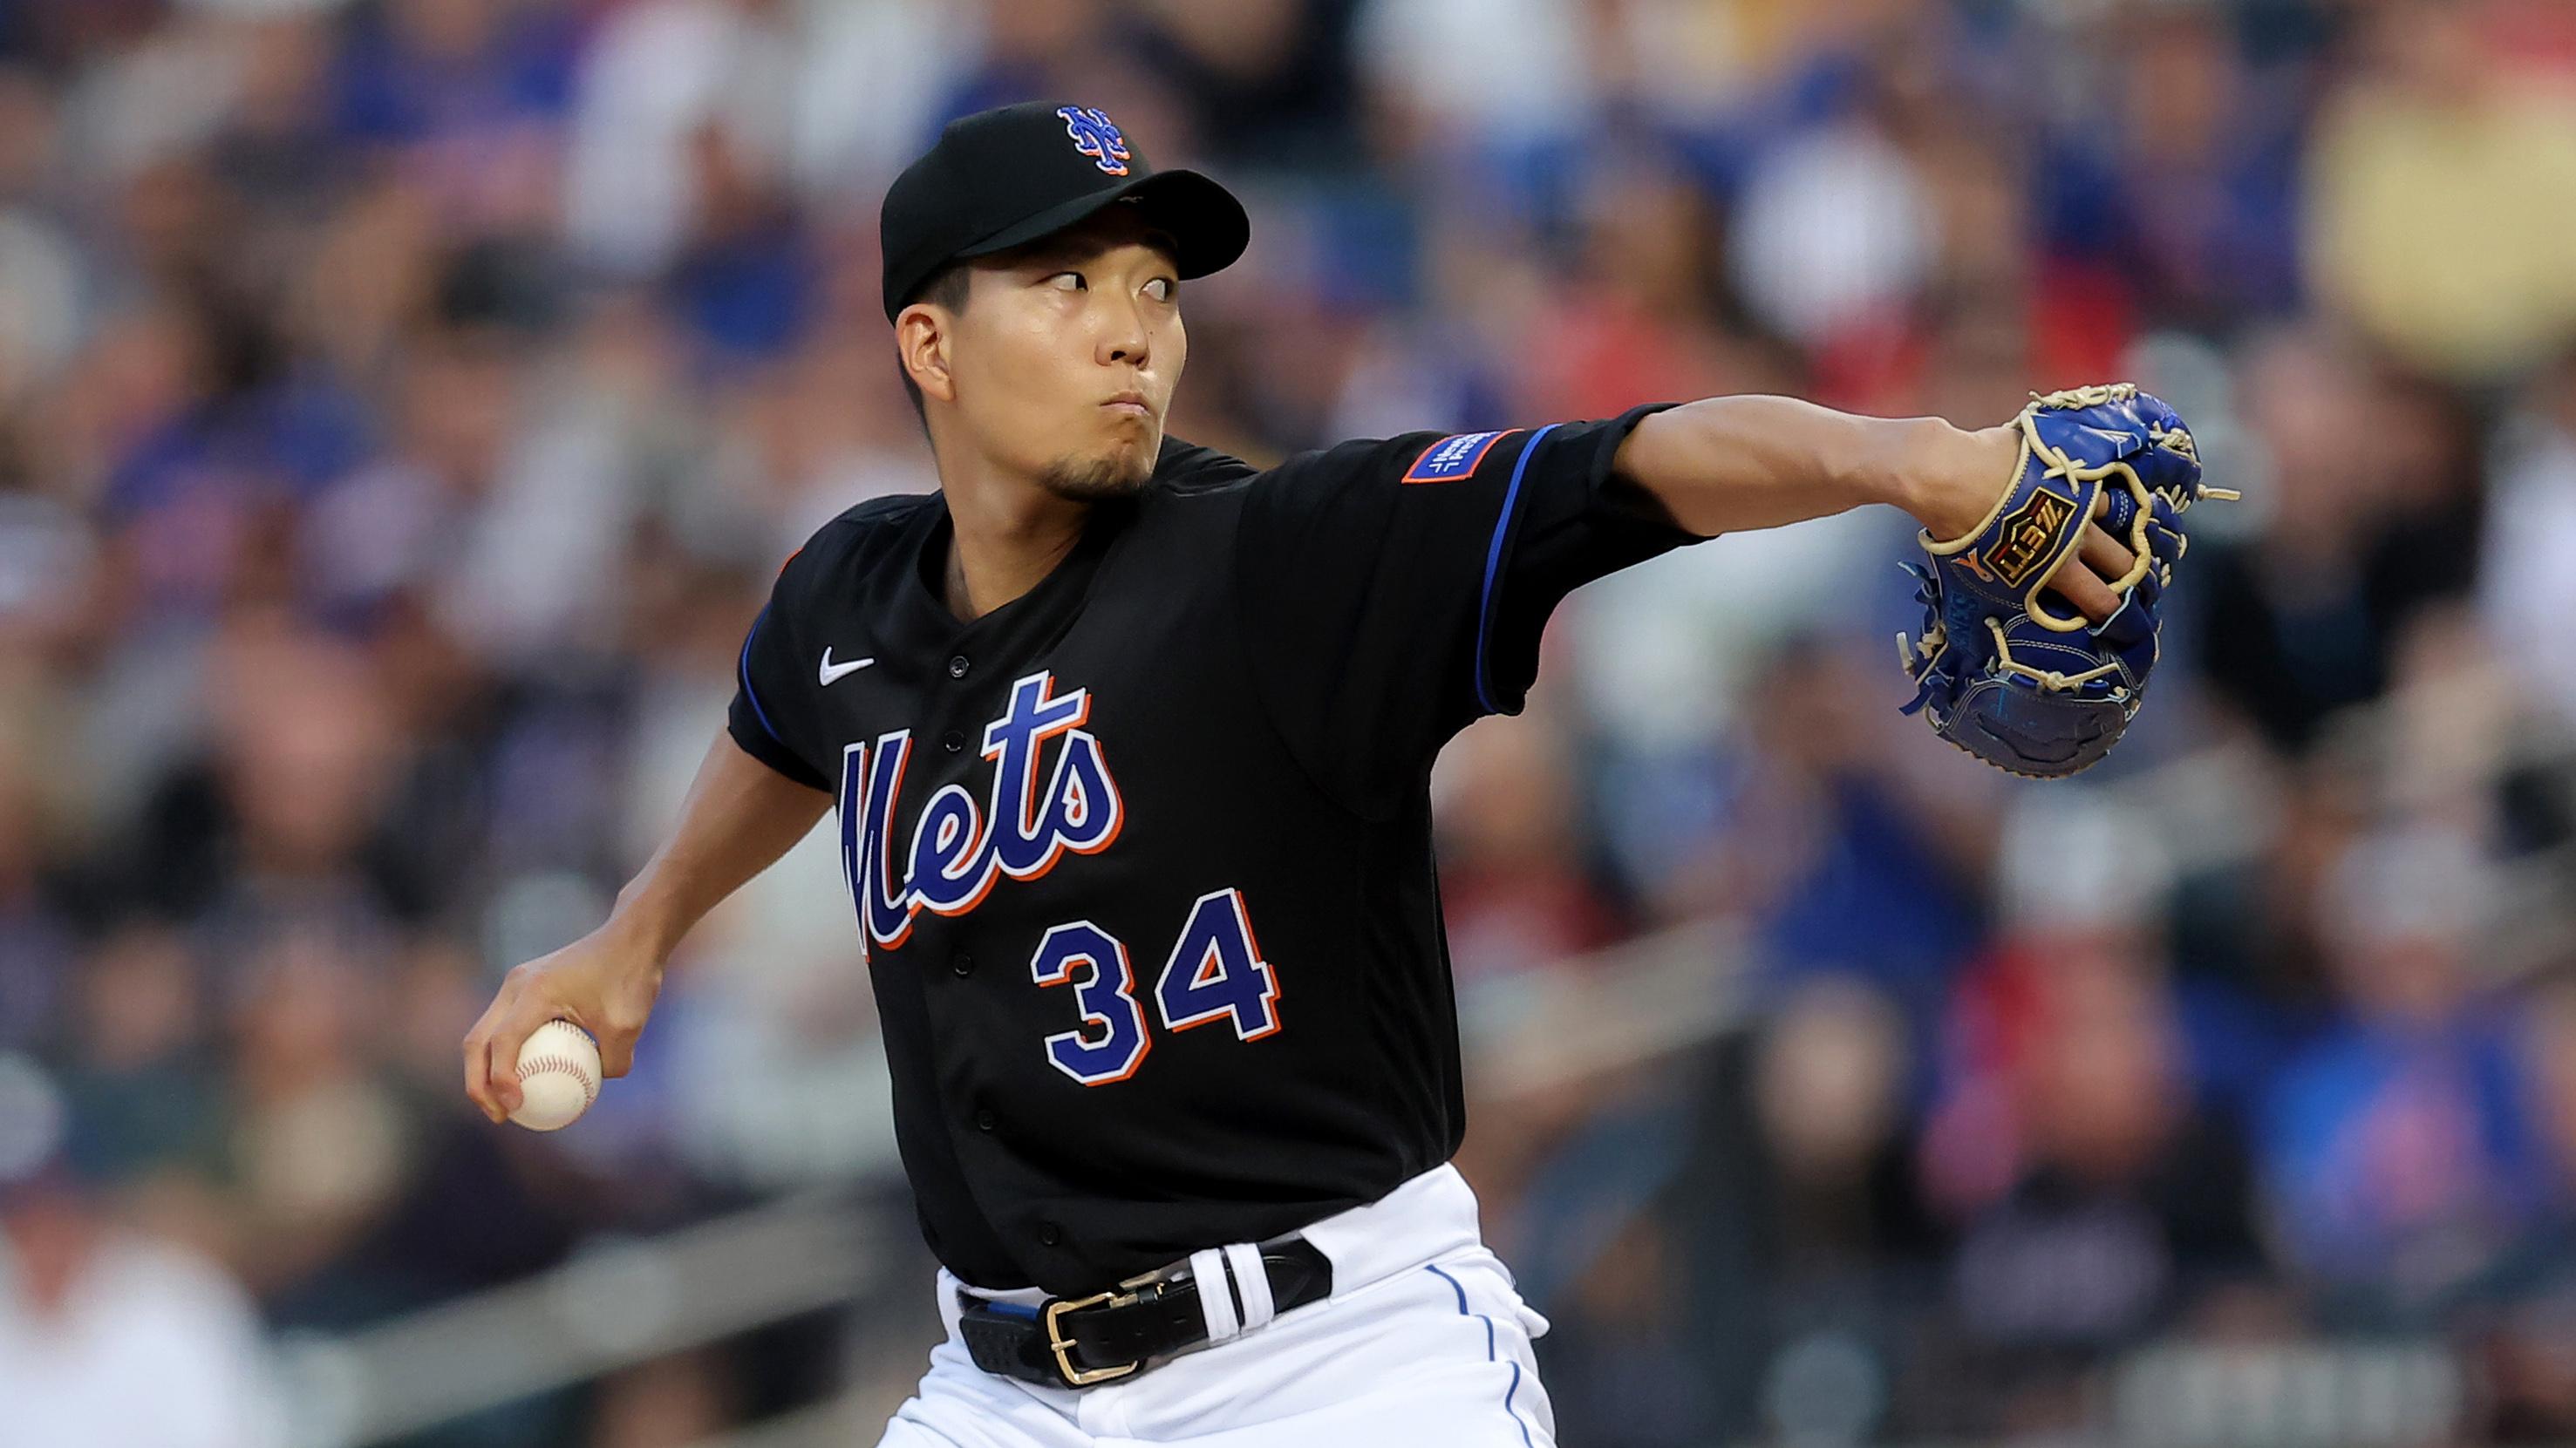 Mets vs. Braves: 5 things to watch and series predictions | July 25-28